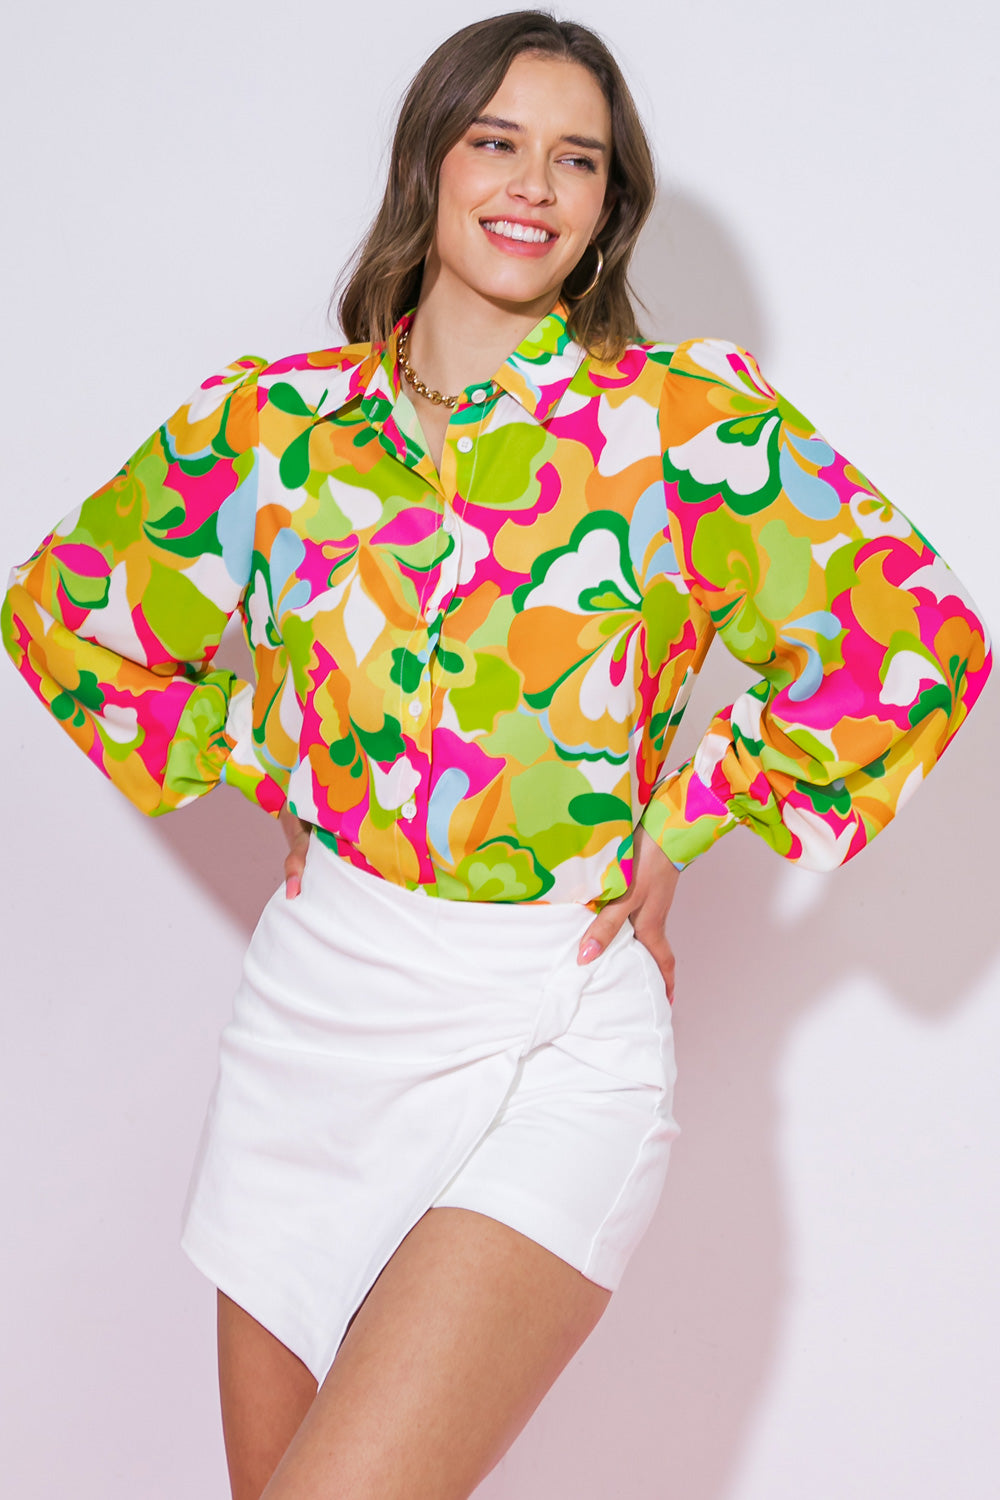 A printed woven top featuring shirt collar, button down and long sleeve with cuff